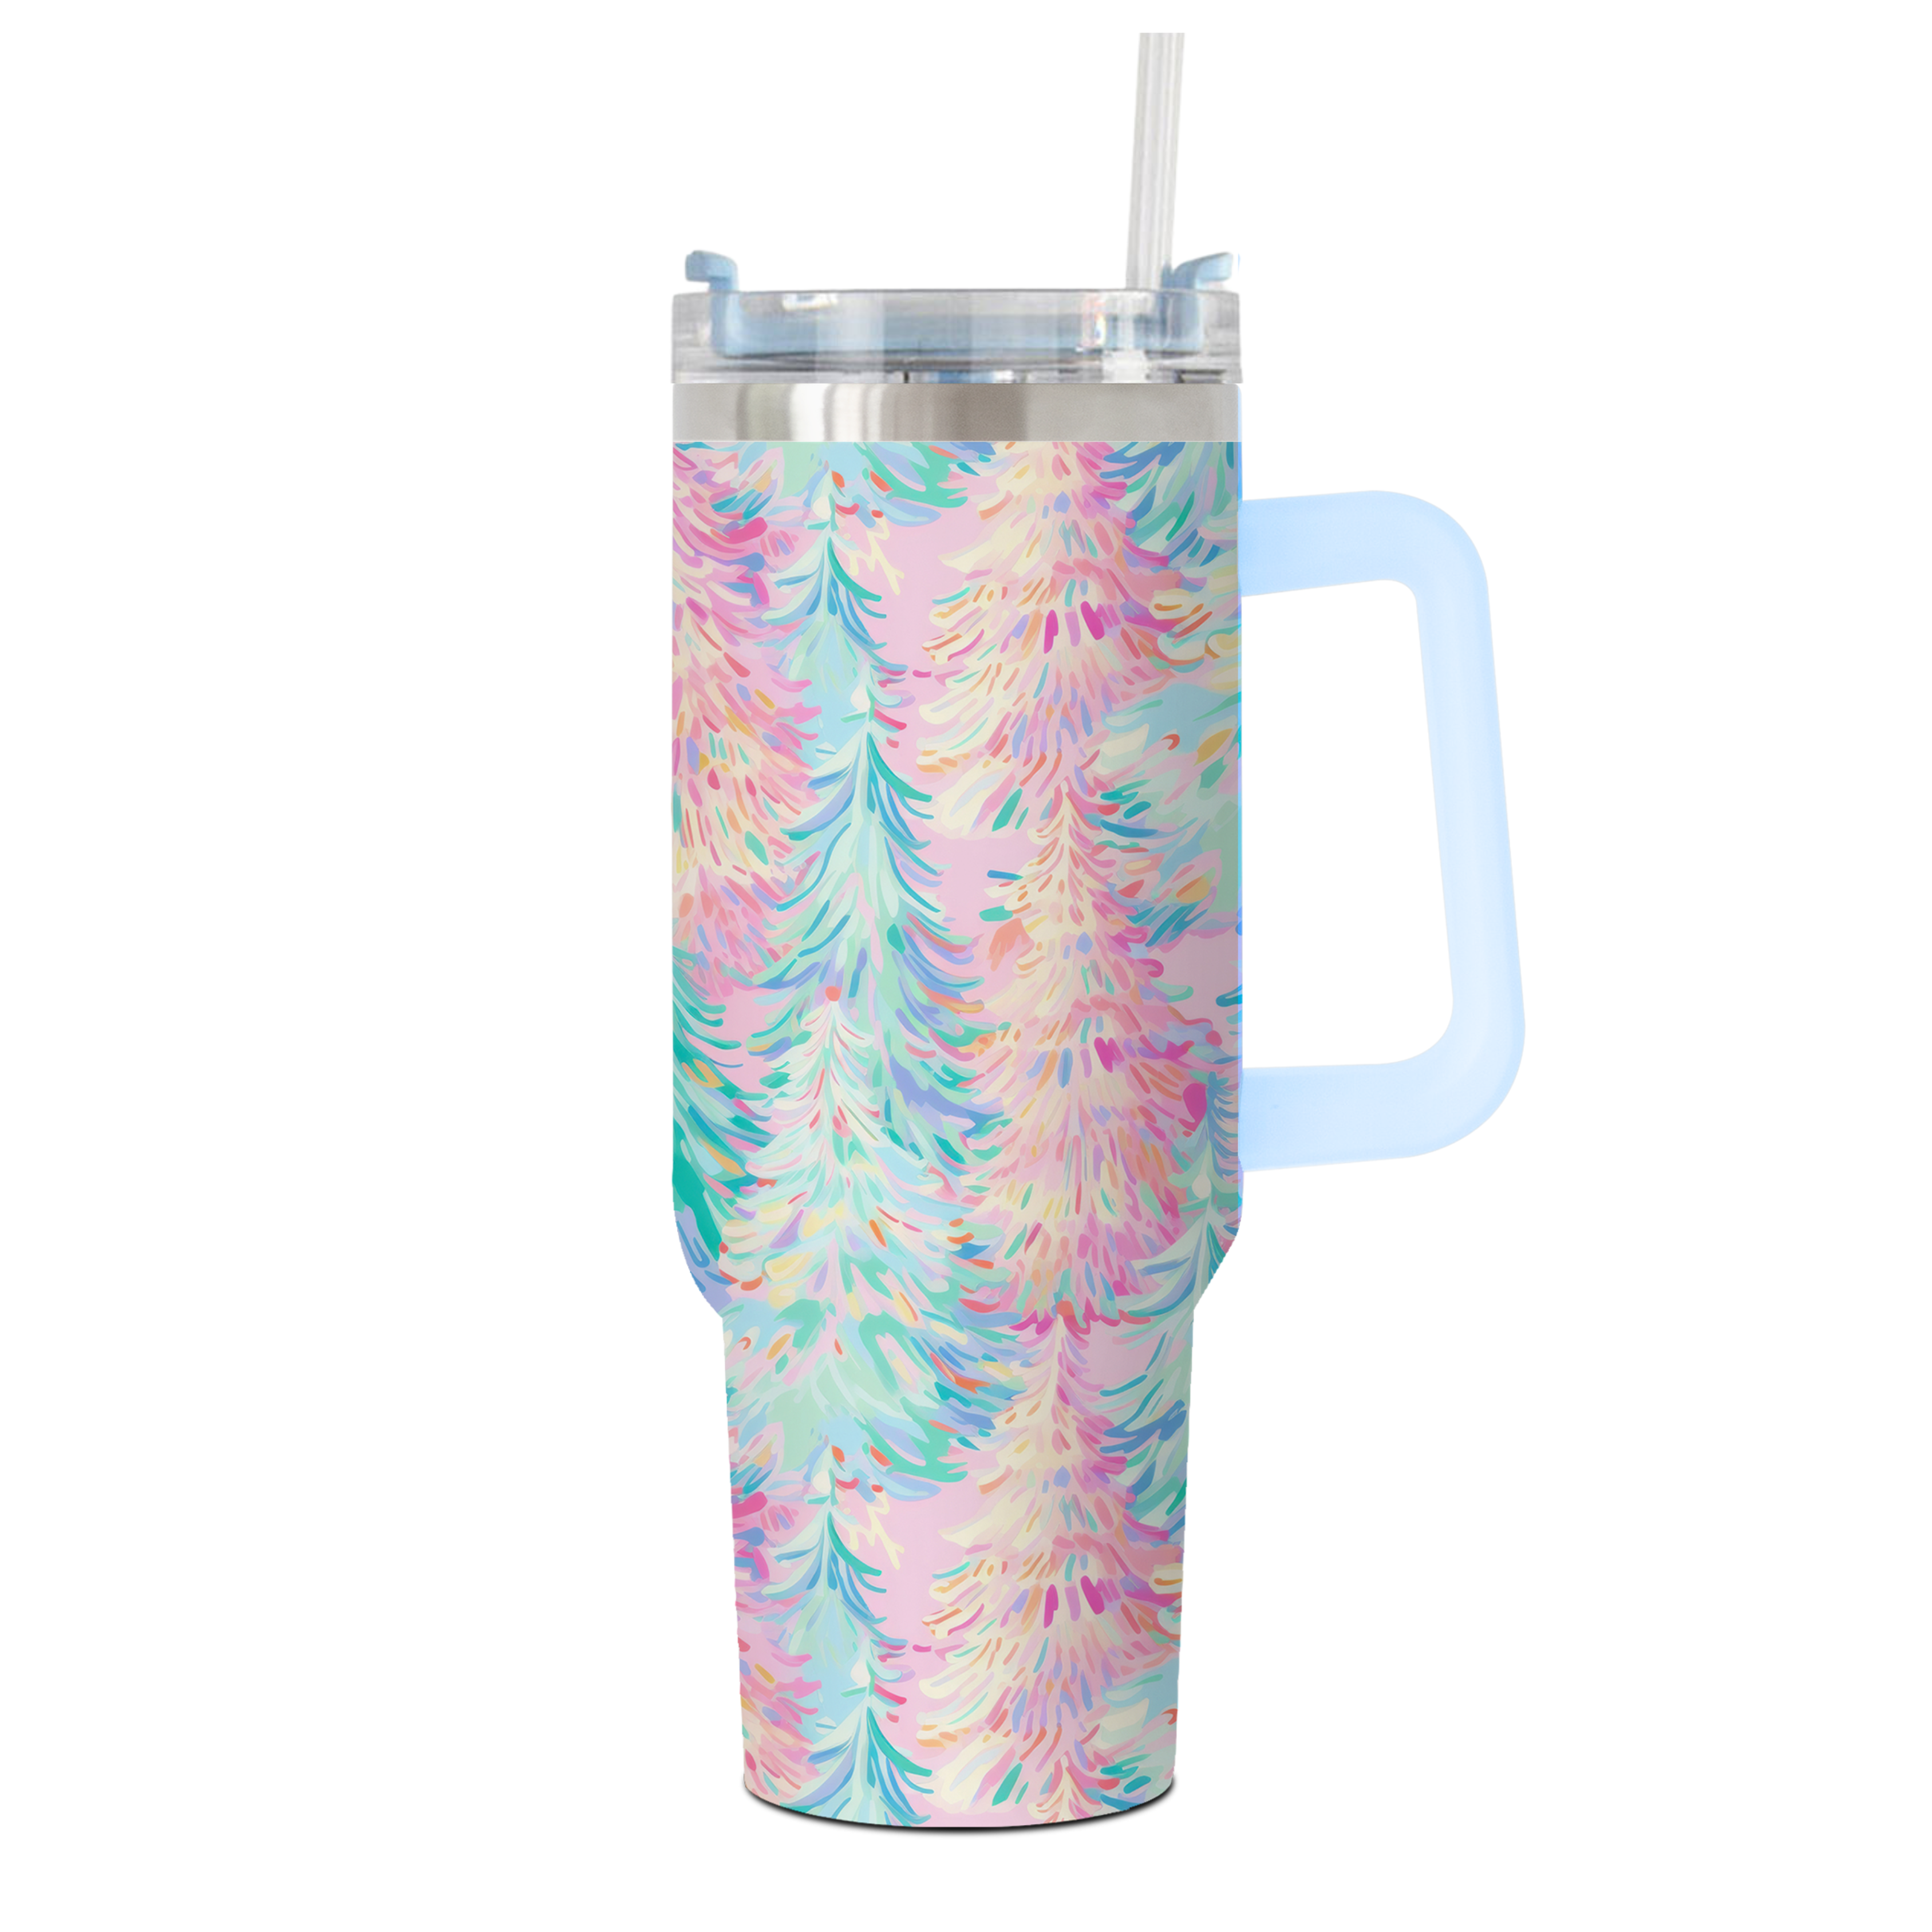 Fairytale Forest 30oz Tumbler with Handle